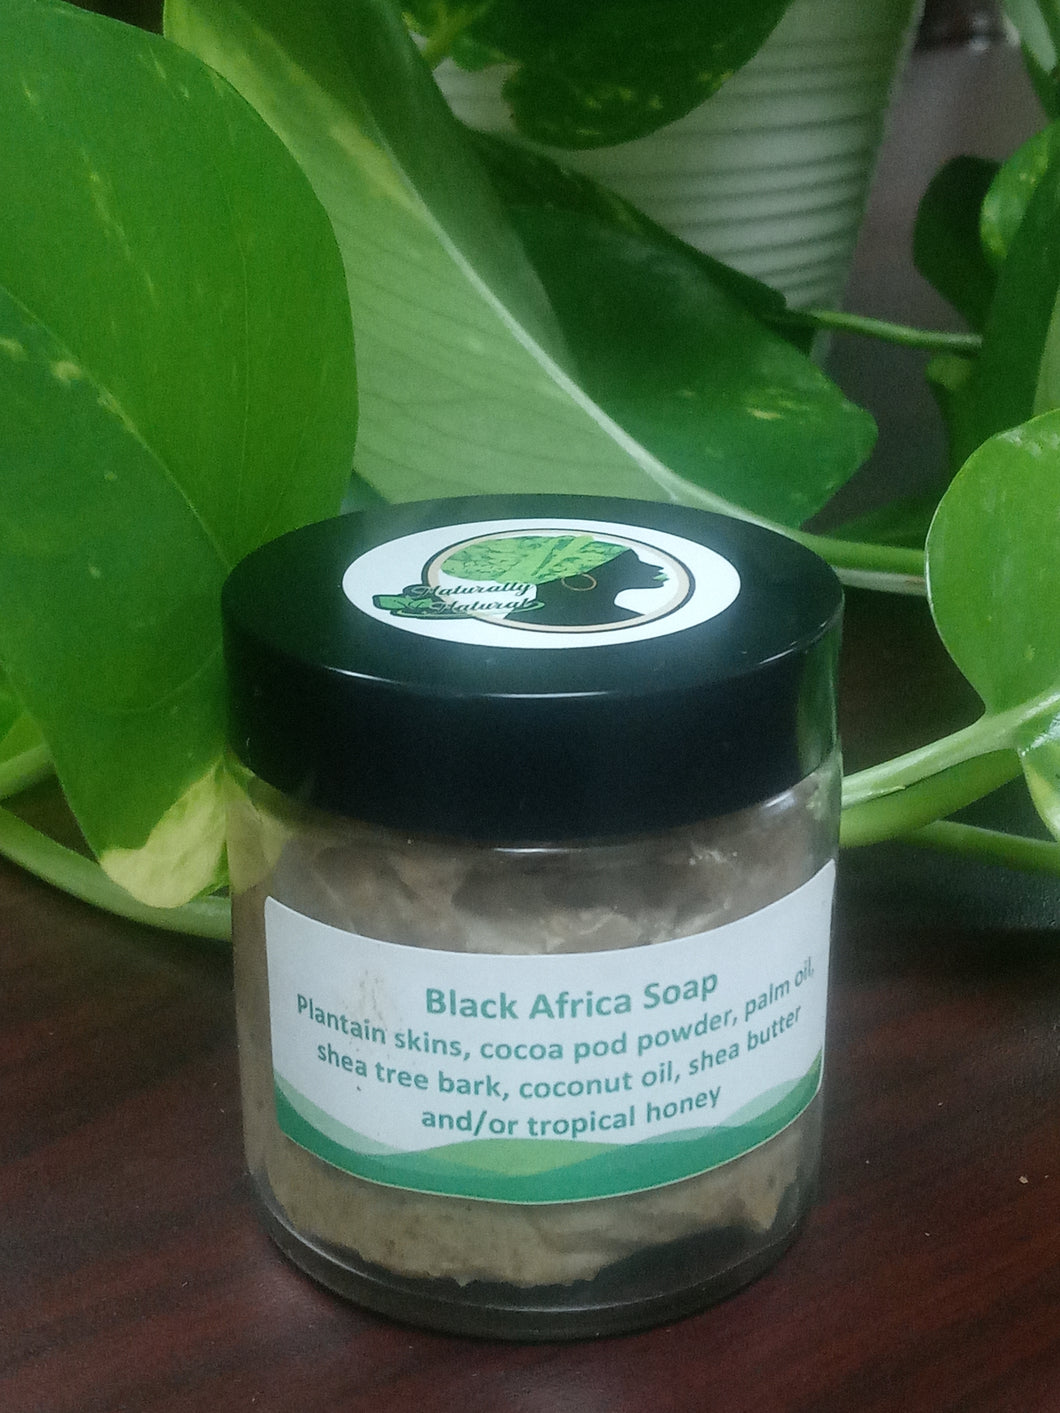 Black Africa Soap, Whipped, 2 oz